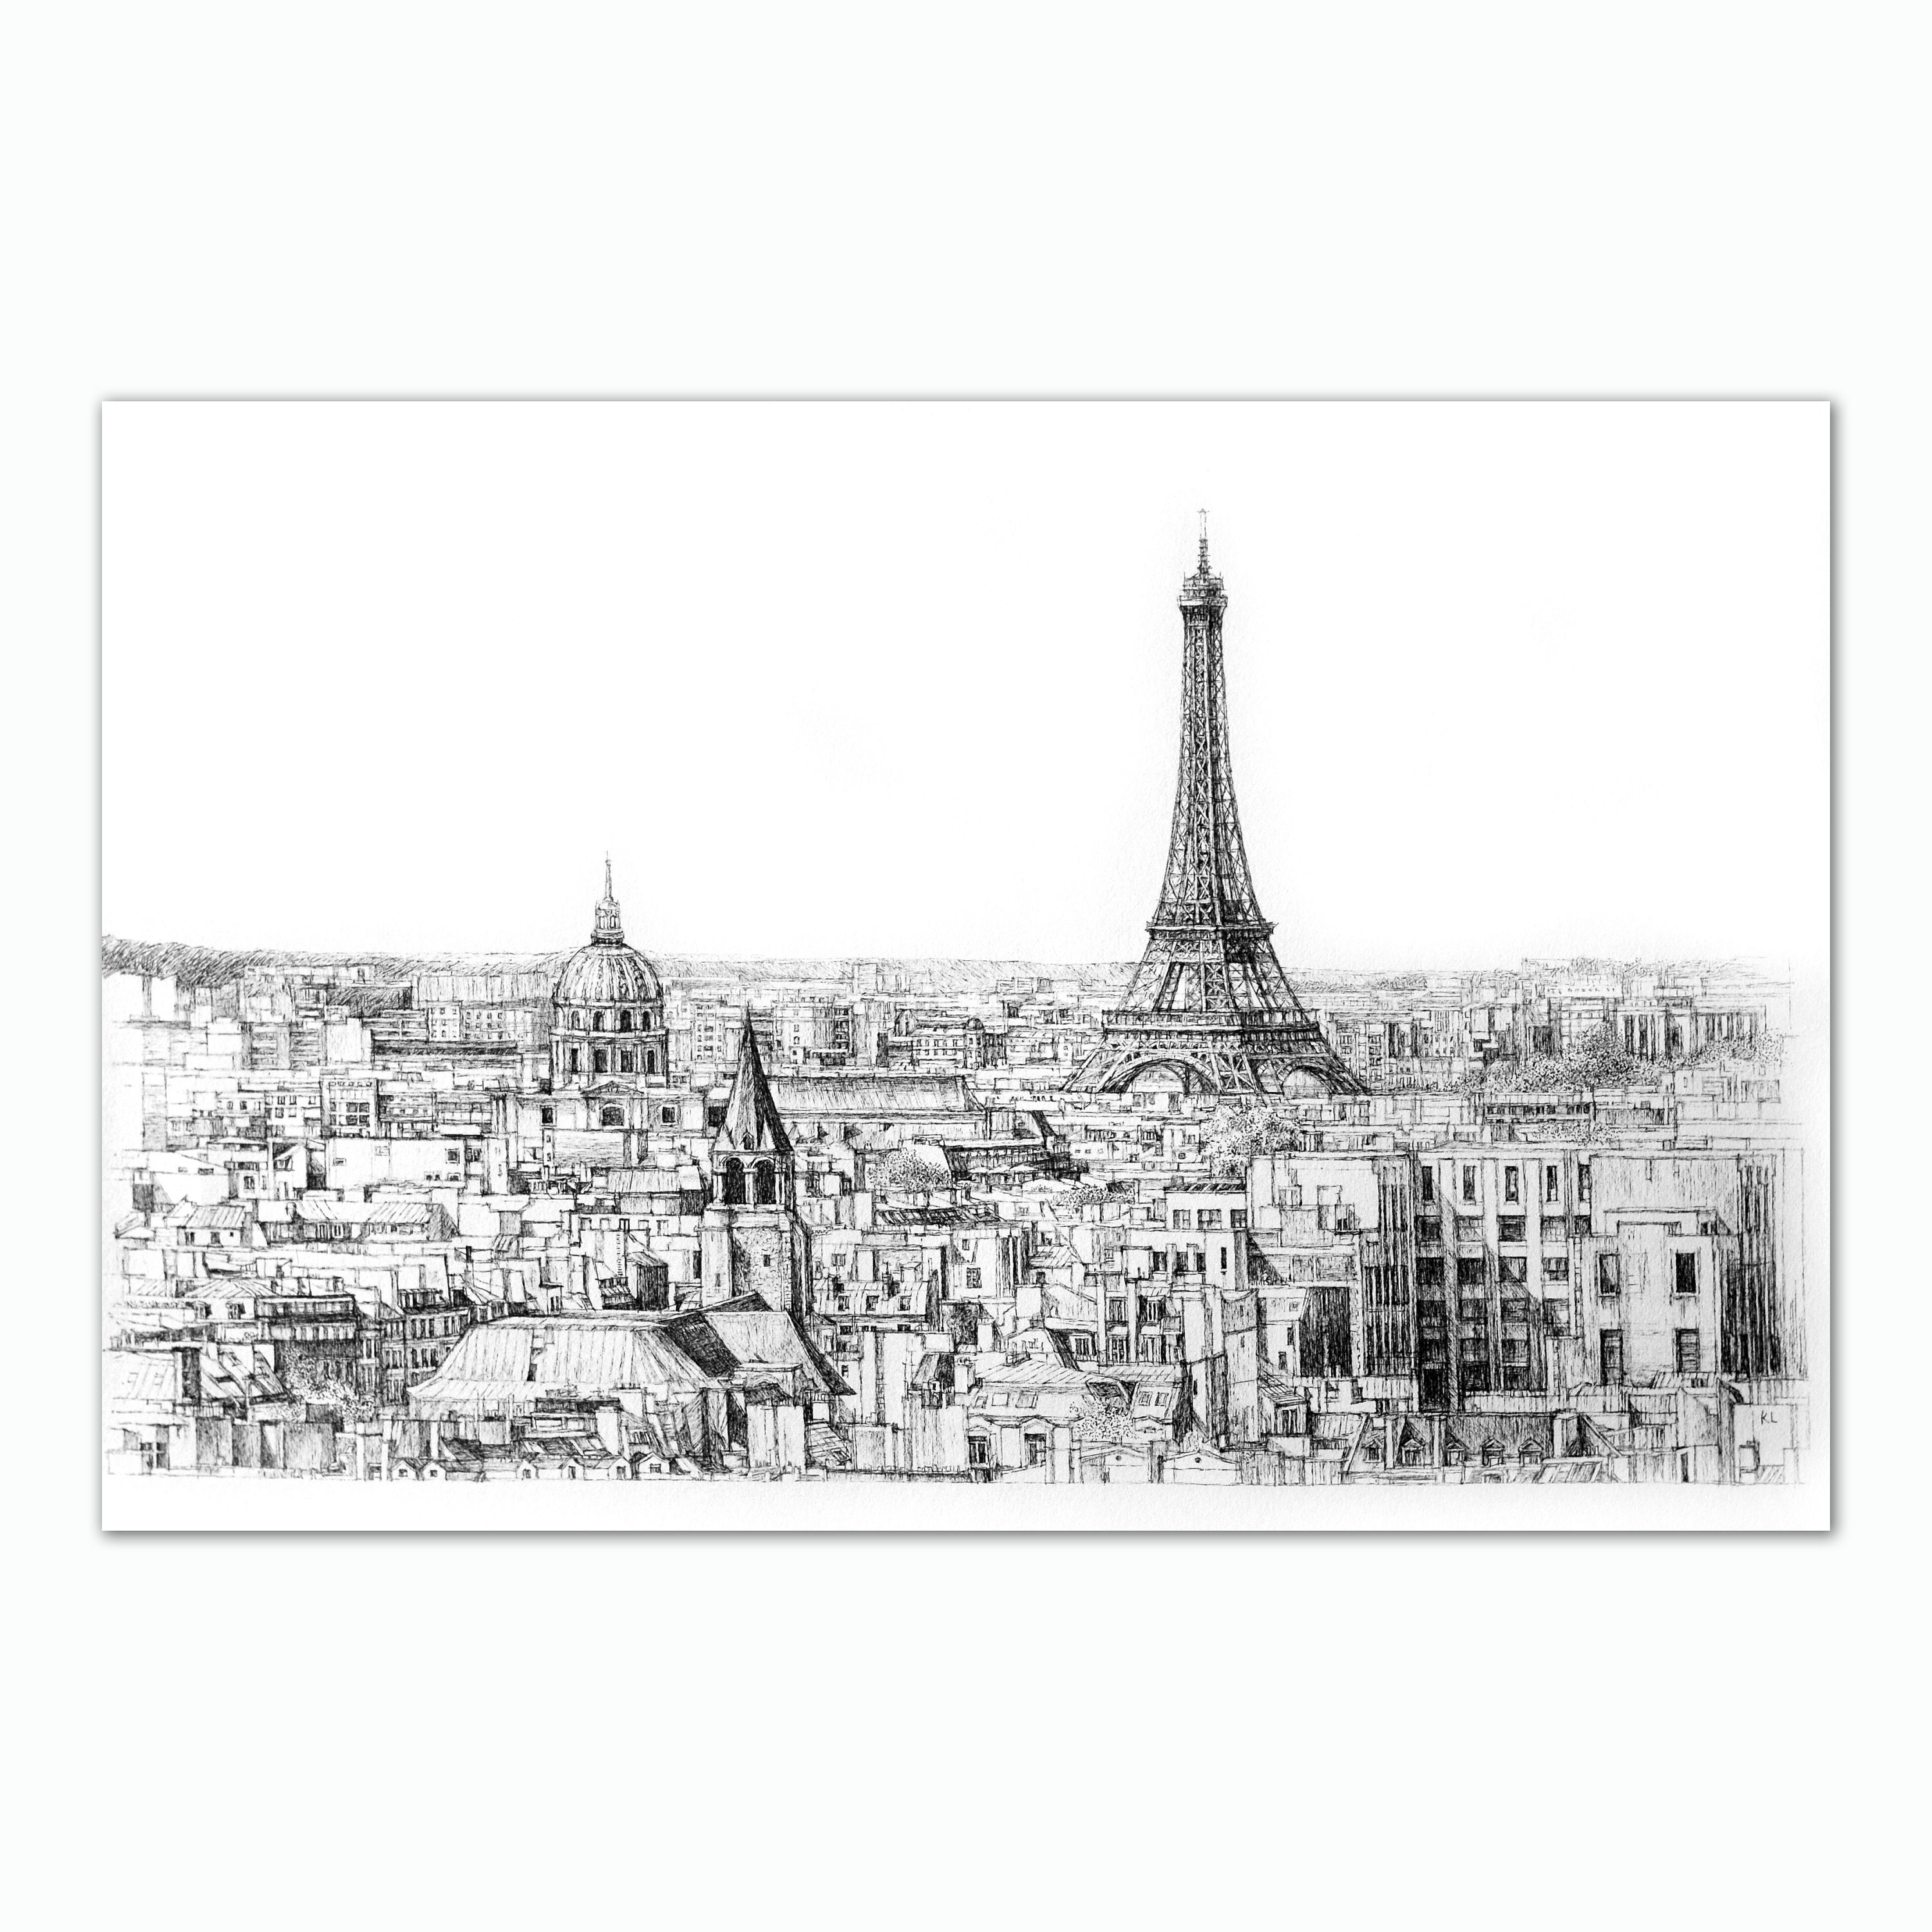 Drawing Paris in a Circle - How to draw the Eiffel Tower in a circle -  YouTube